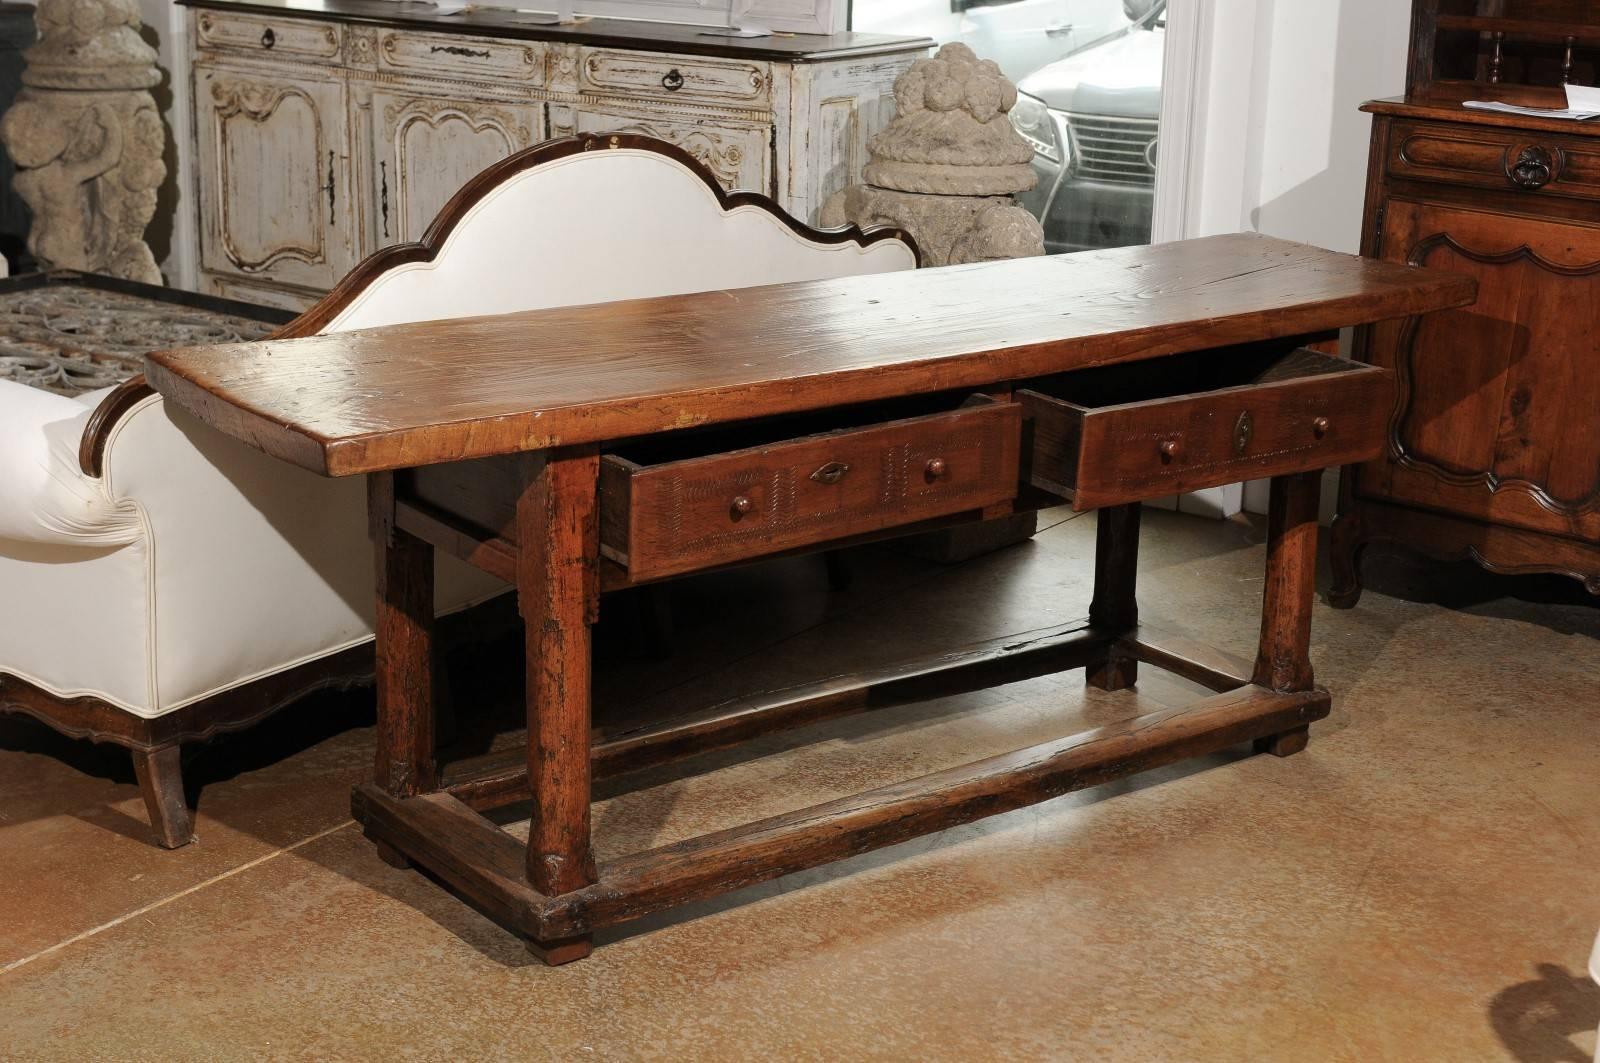 A French cherry sofa table with two drawers and side stretcher from the mid 17th century. Born in the early years of King Louis XIV's reign, this French sofa table features a rectangular single plank top sitting above two drawers with wavy 